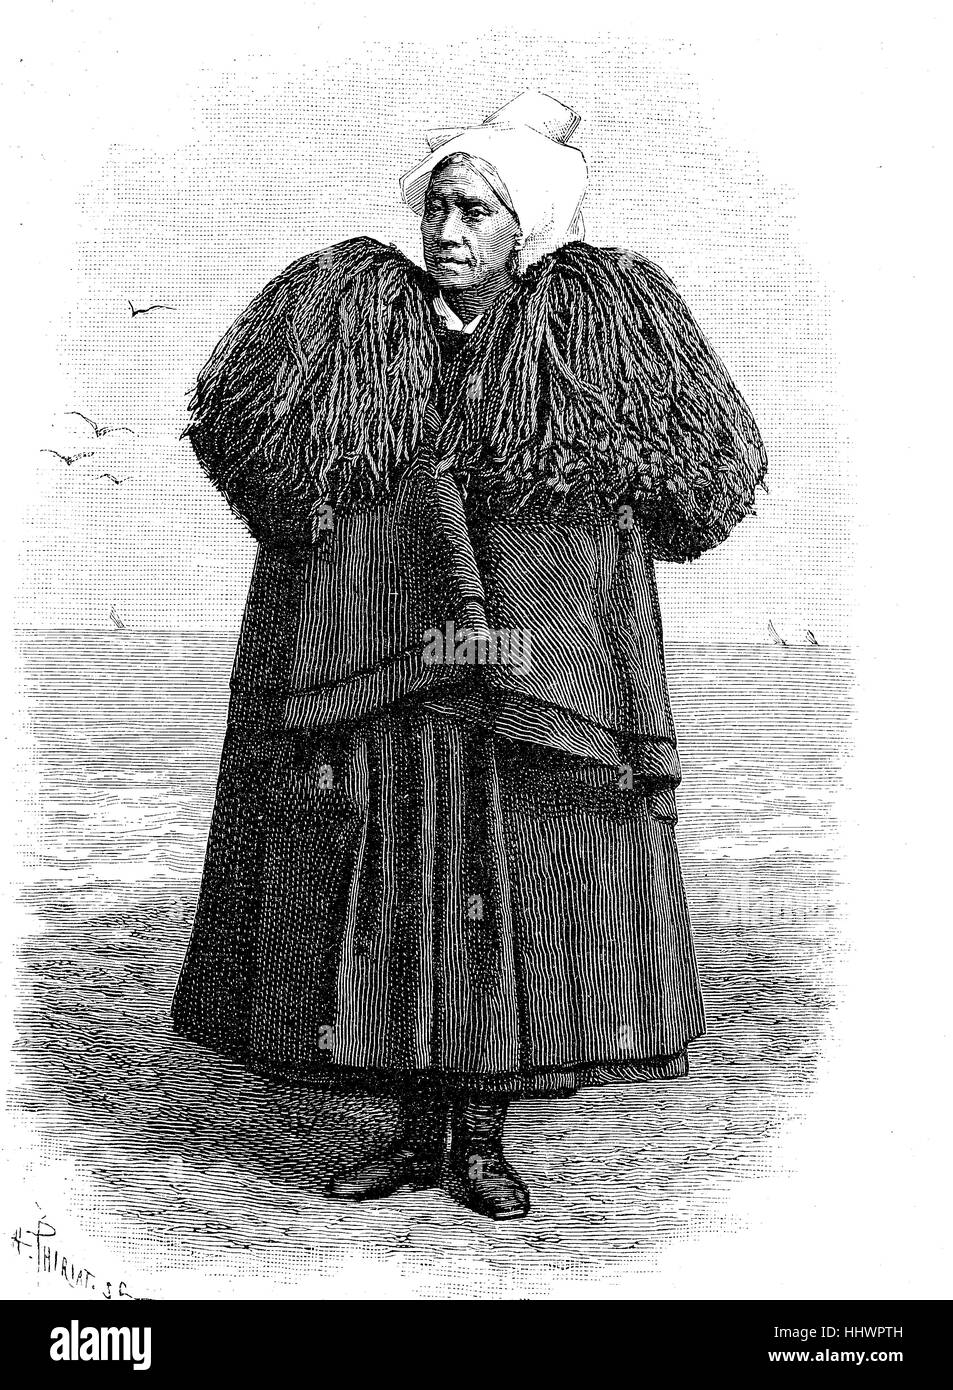 French folklore, mourning of a fisherwoman from the area of Sables-d'Olonne, historical image or illustration, published 1890, digital improved Stock Photo